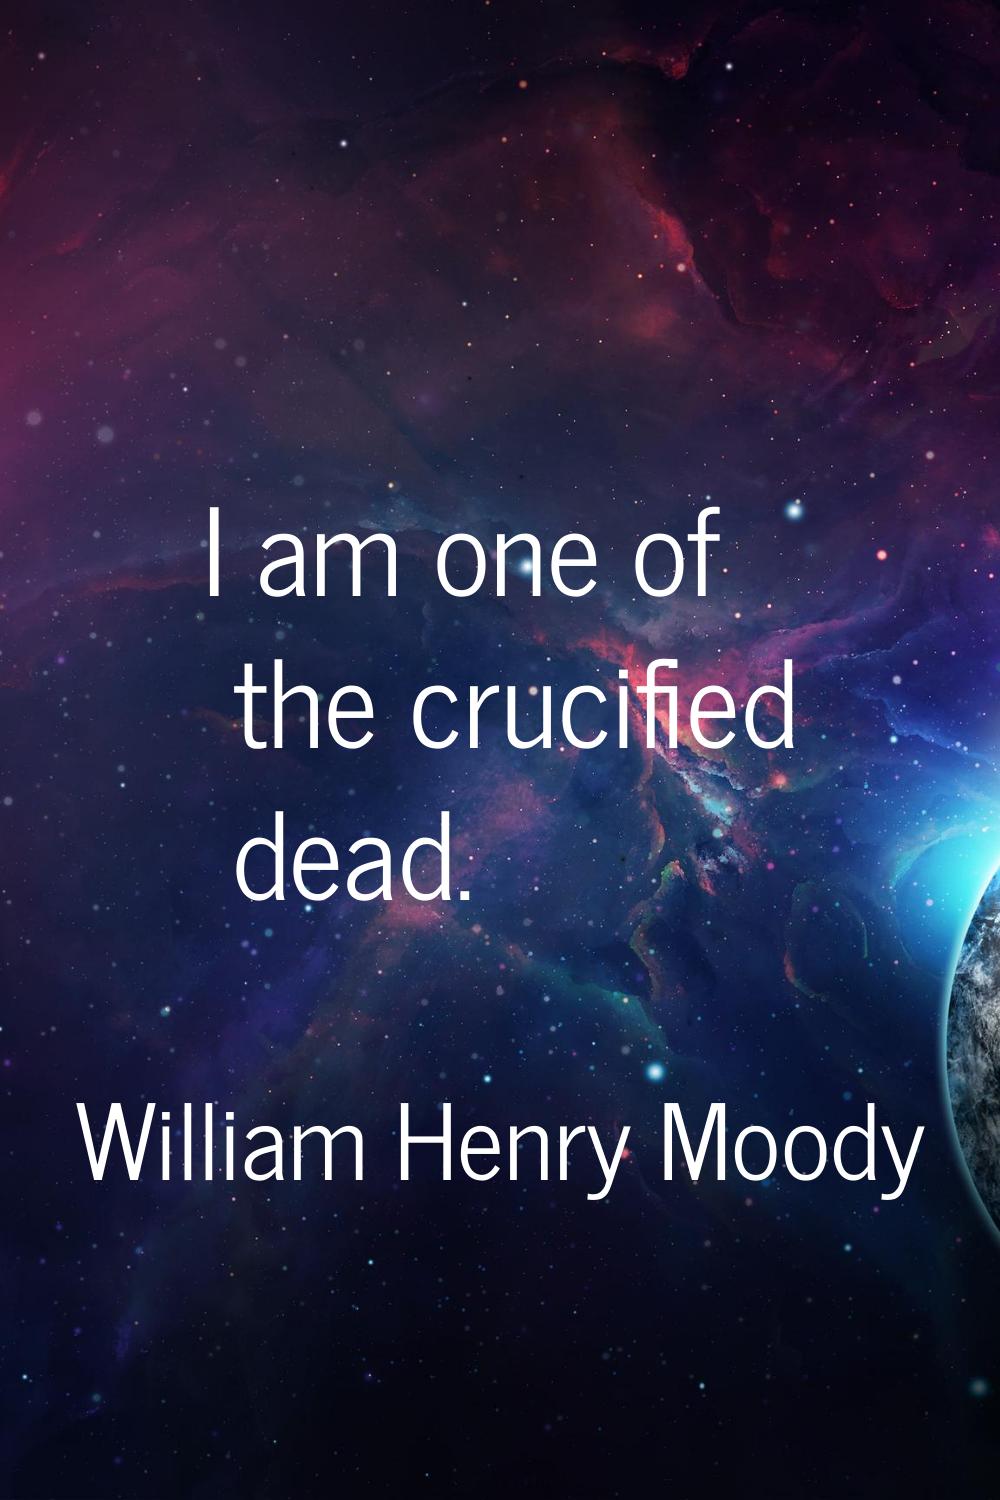 I am one of the crucified dead.